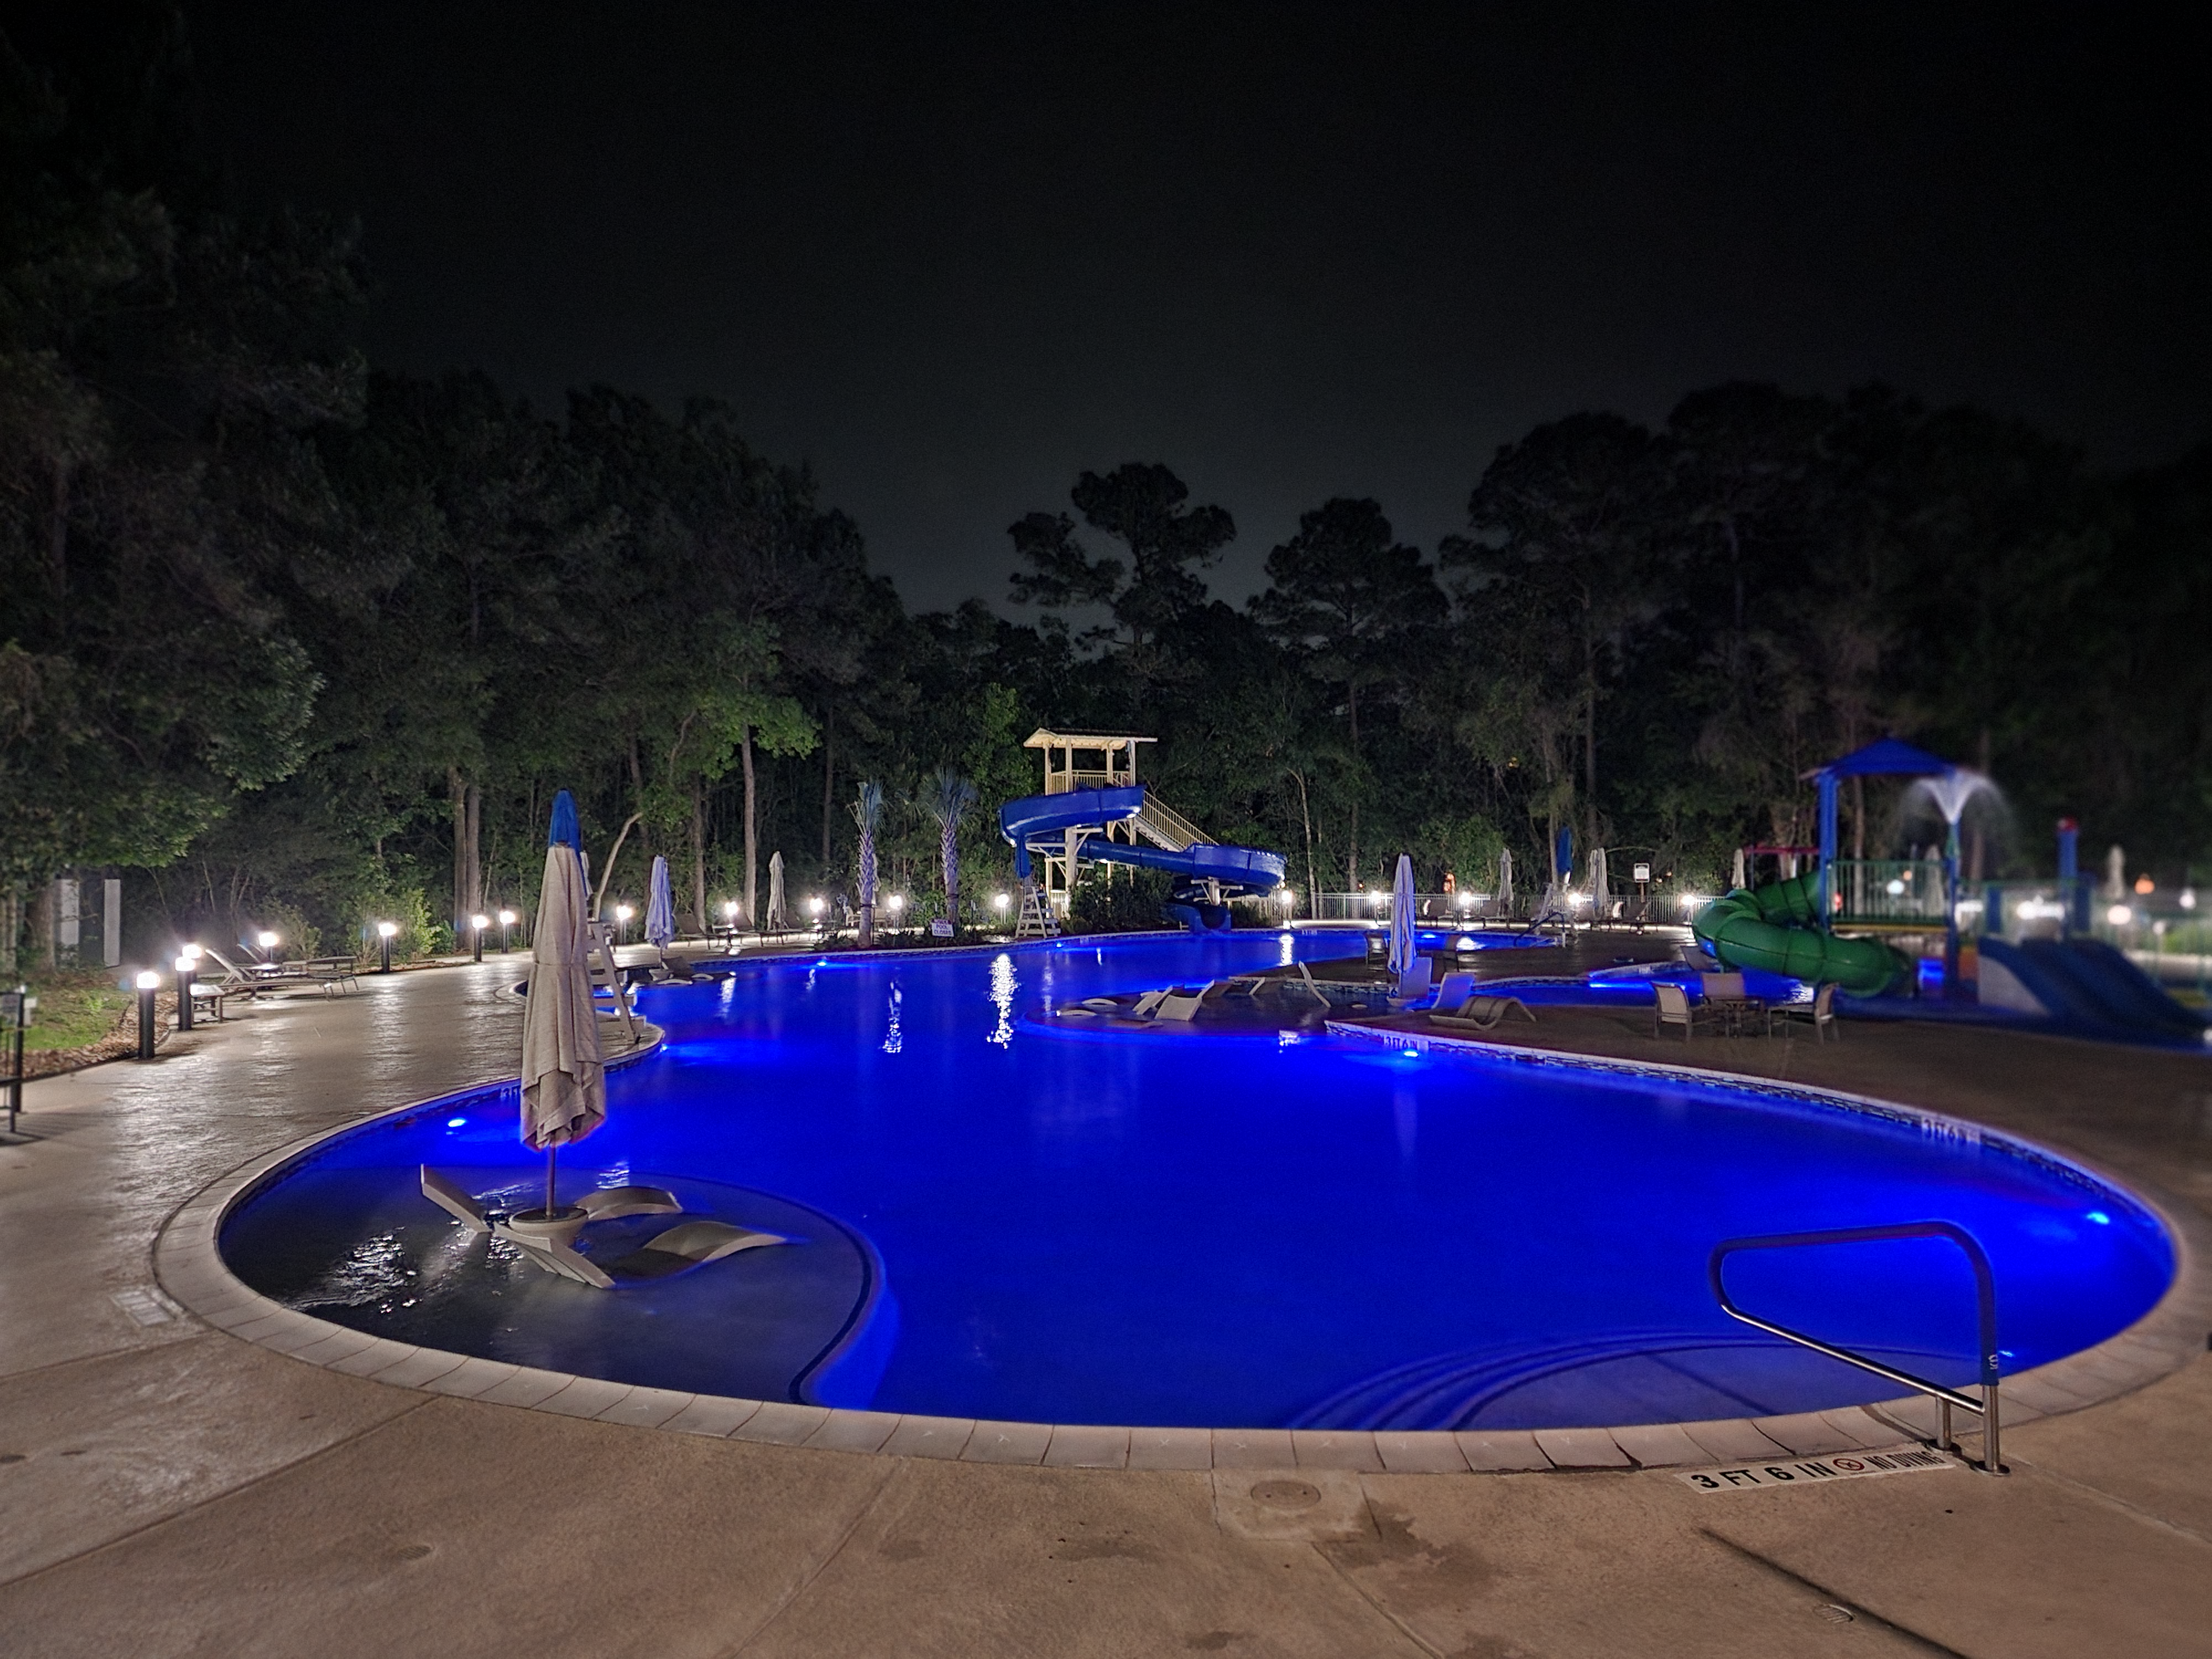 Resort-style pool at night with color changing LED pool lights thumbnail